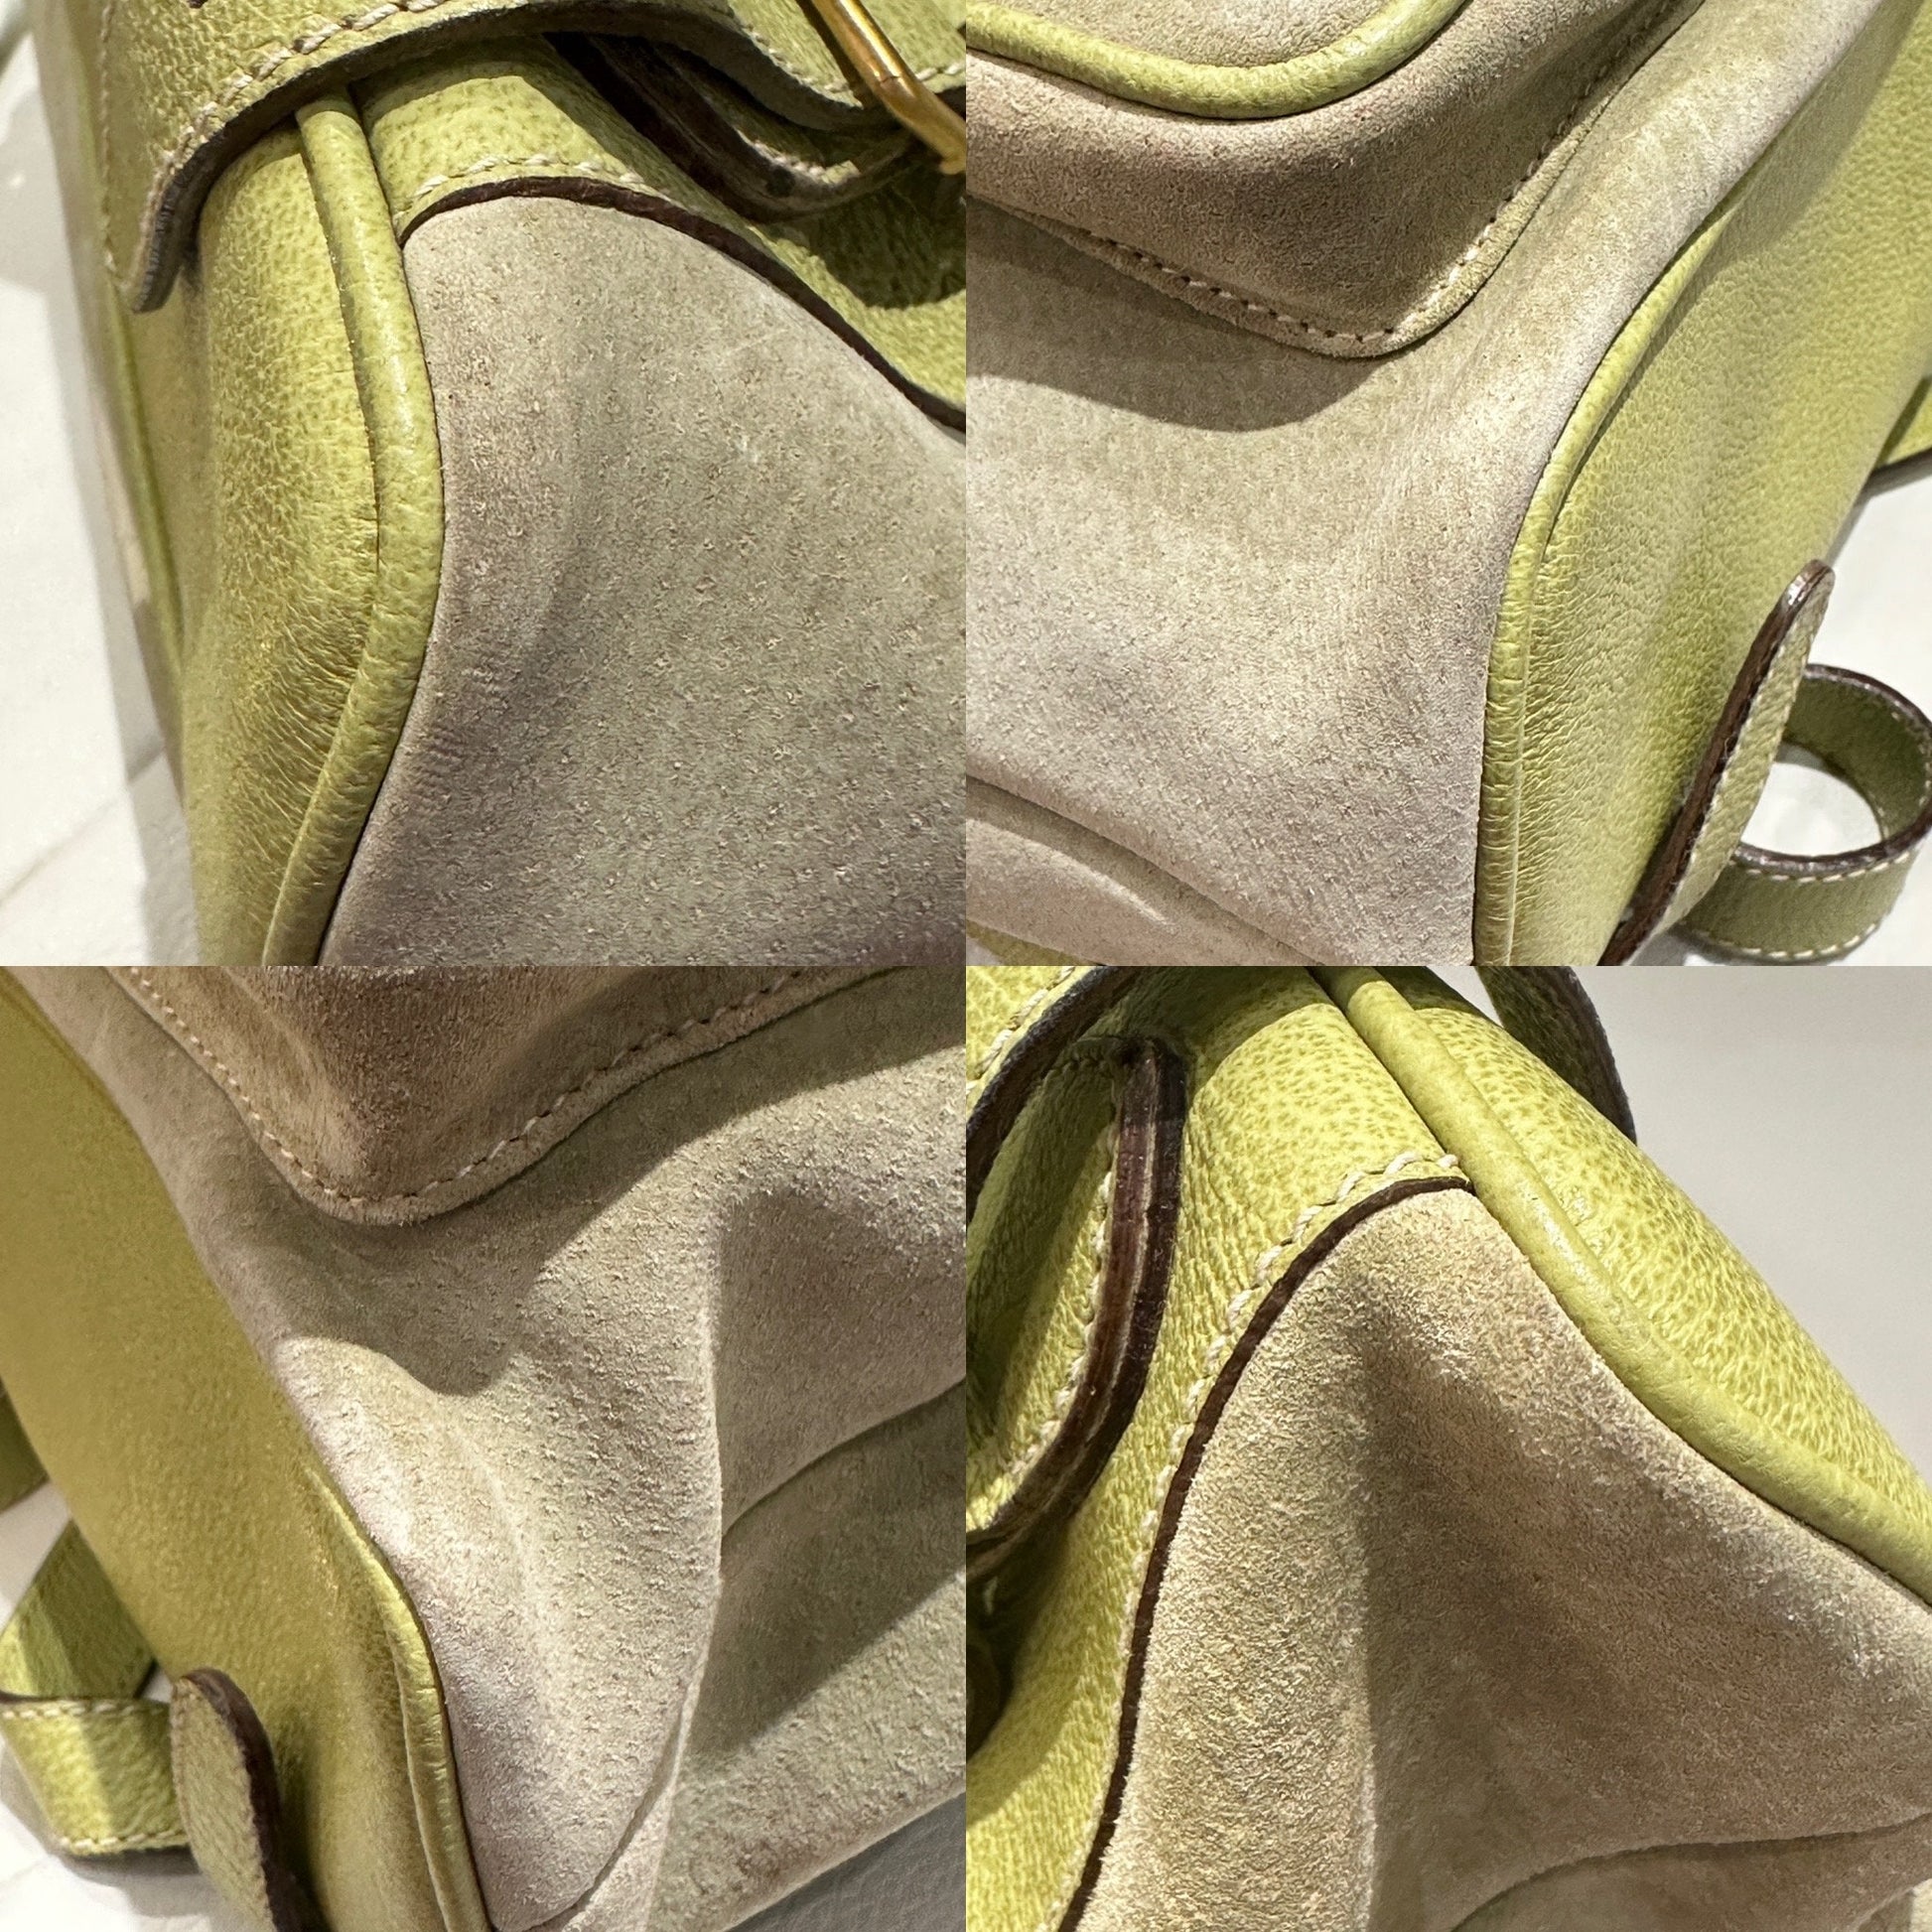 GUCCI VINTAGE 100% Authentic Genuine Suede Iconic Bamboo Handle Backpack, Light Sage Green, 2000's, Good Condition